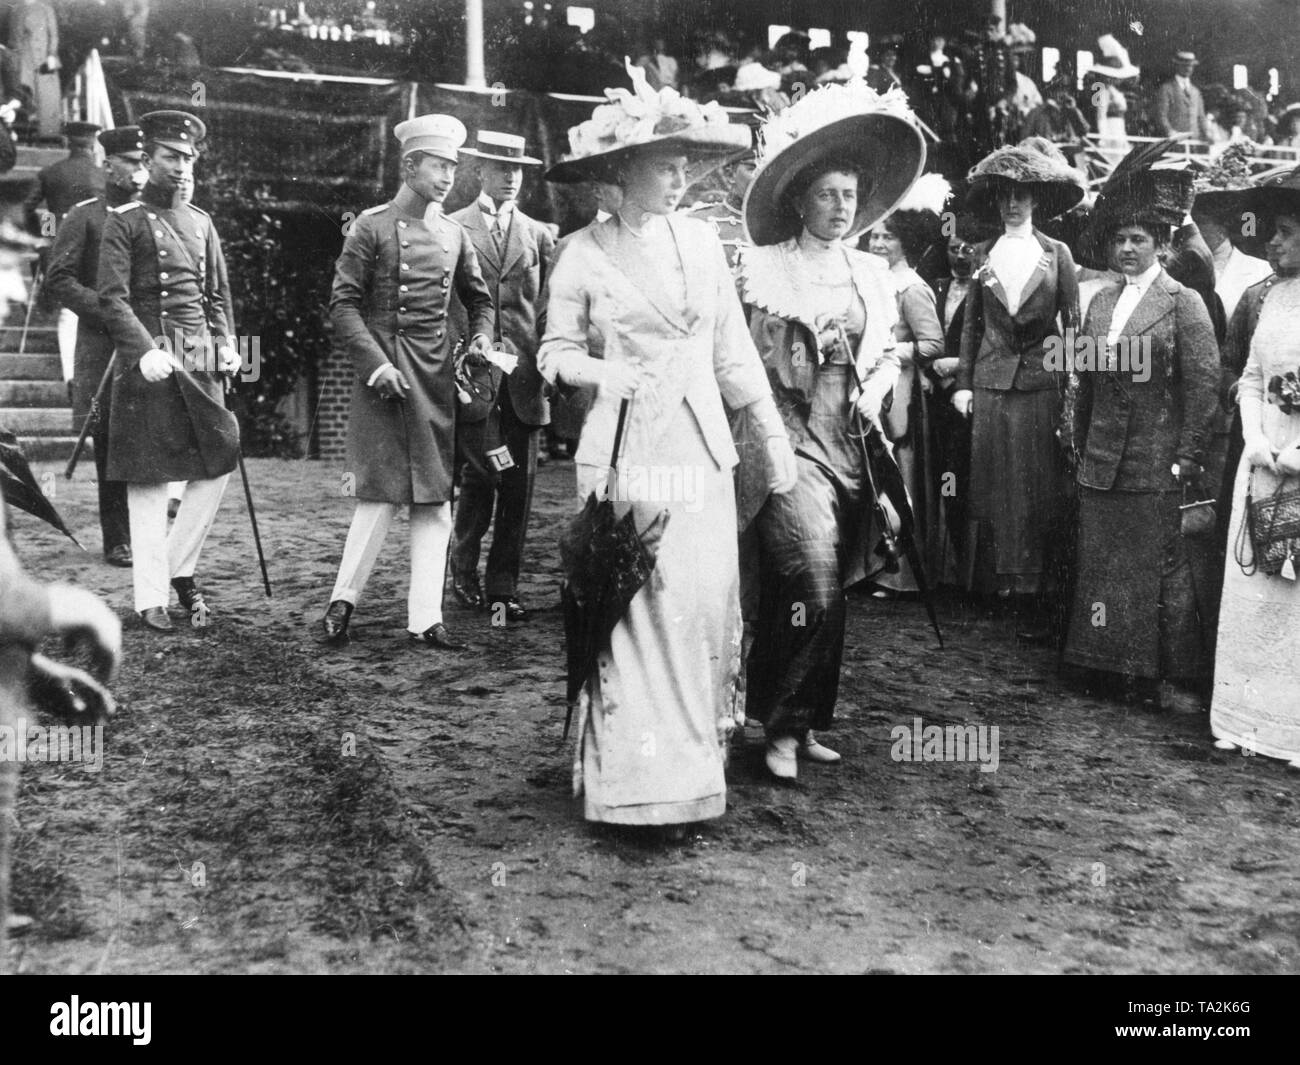 Crown Prince Wilhelm (3rd from the left with binoculars in hand) visits a racecourse in Ruhleben with his wife Cecilie (front left) and his sister Sophie Charlotte of Oldenburg (front right). Stock Photo